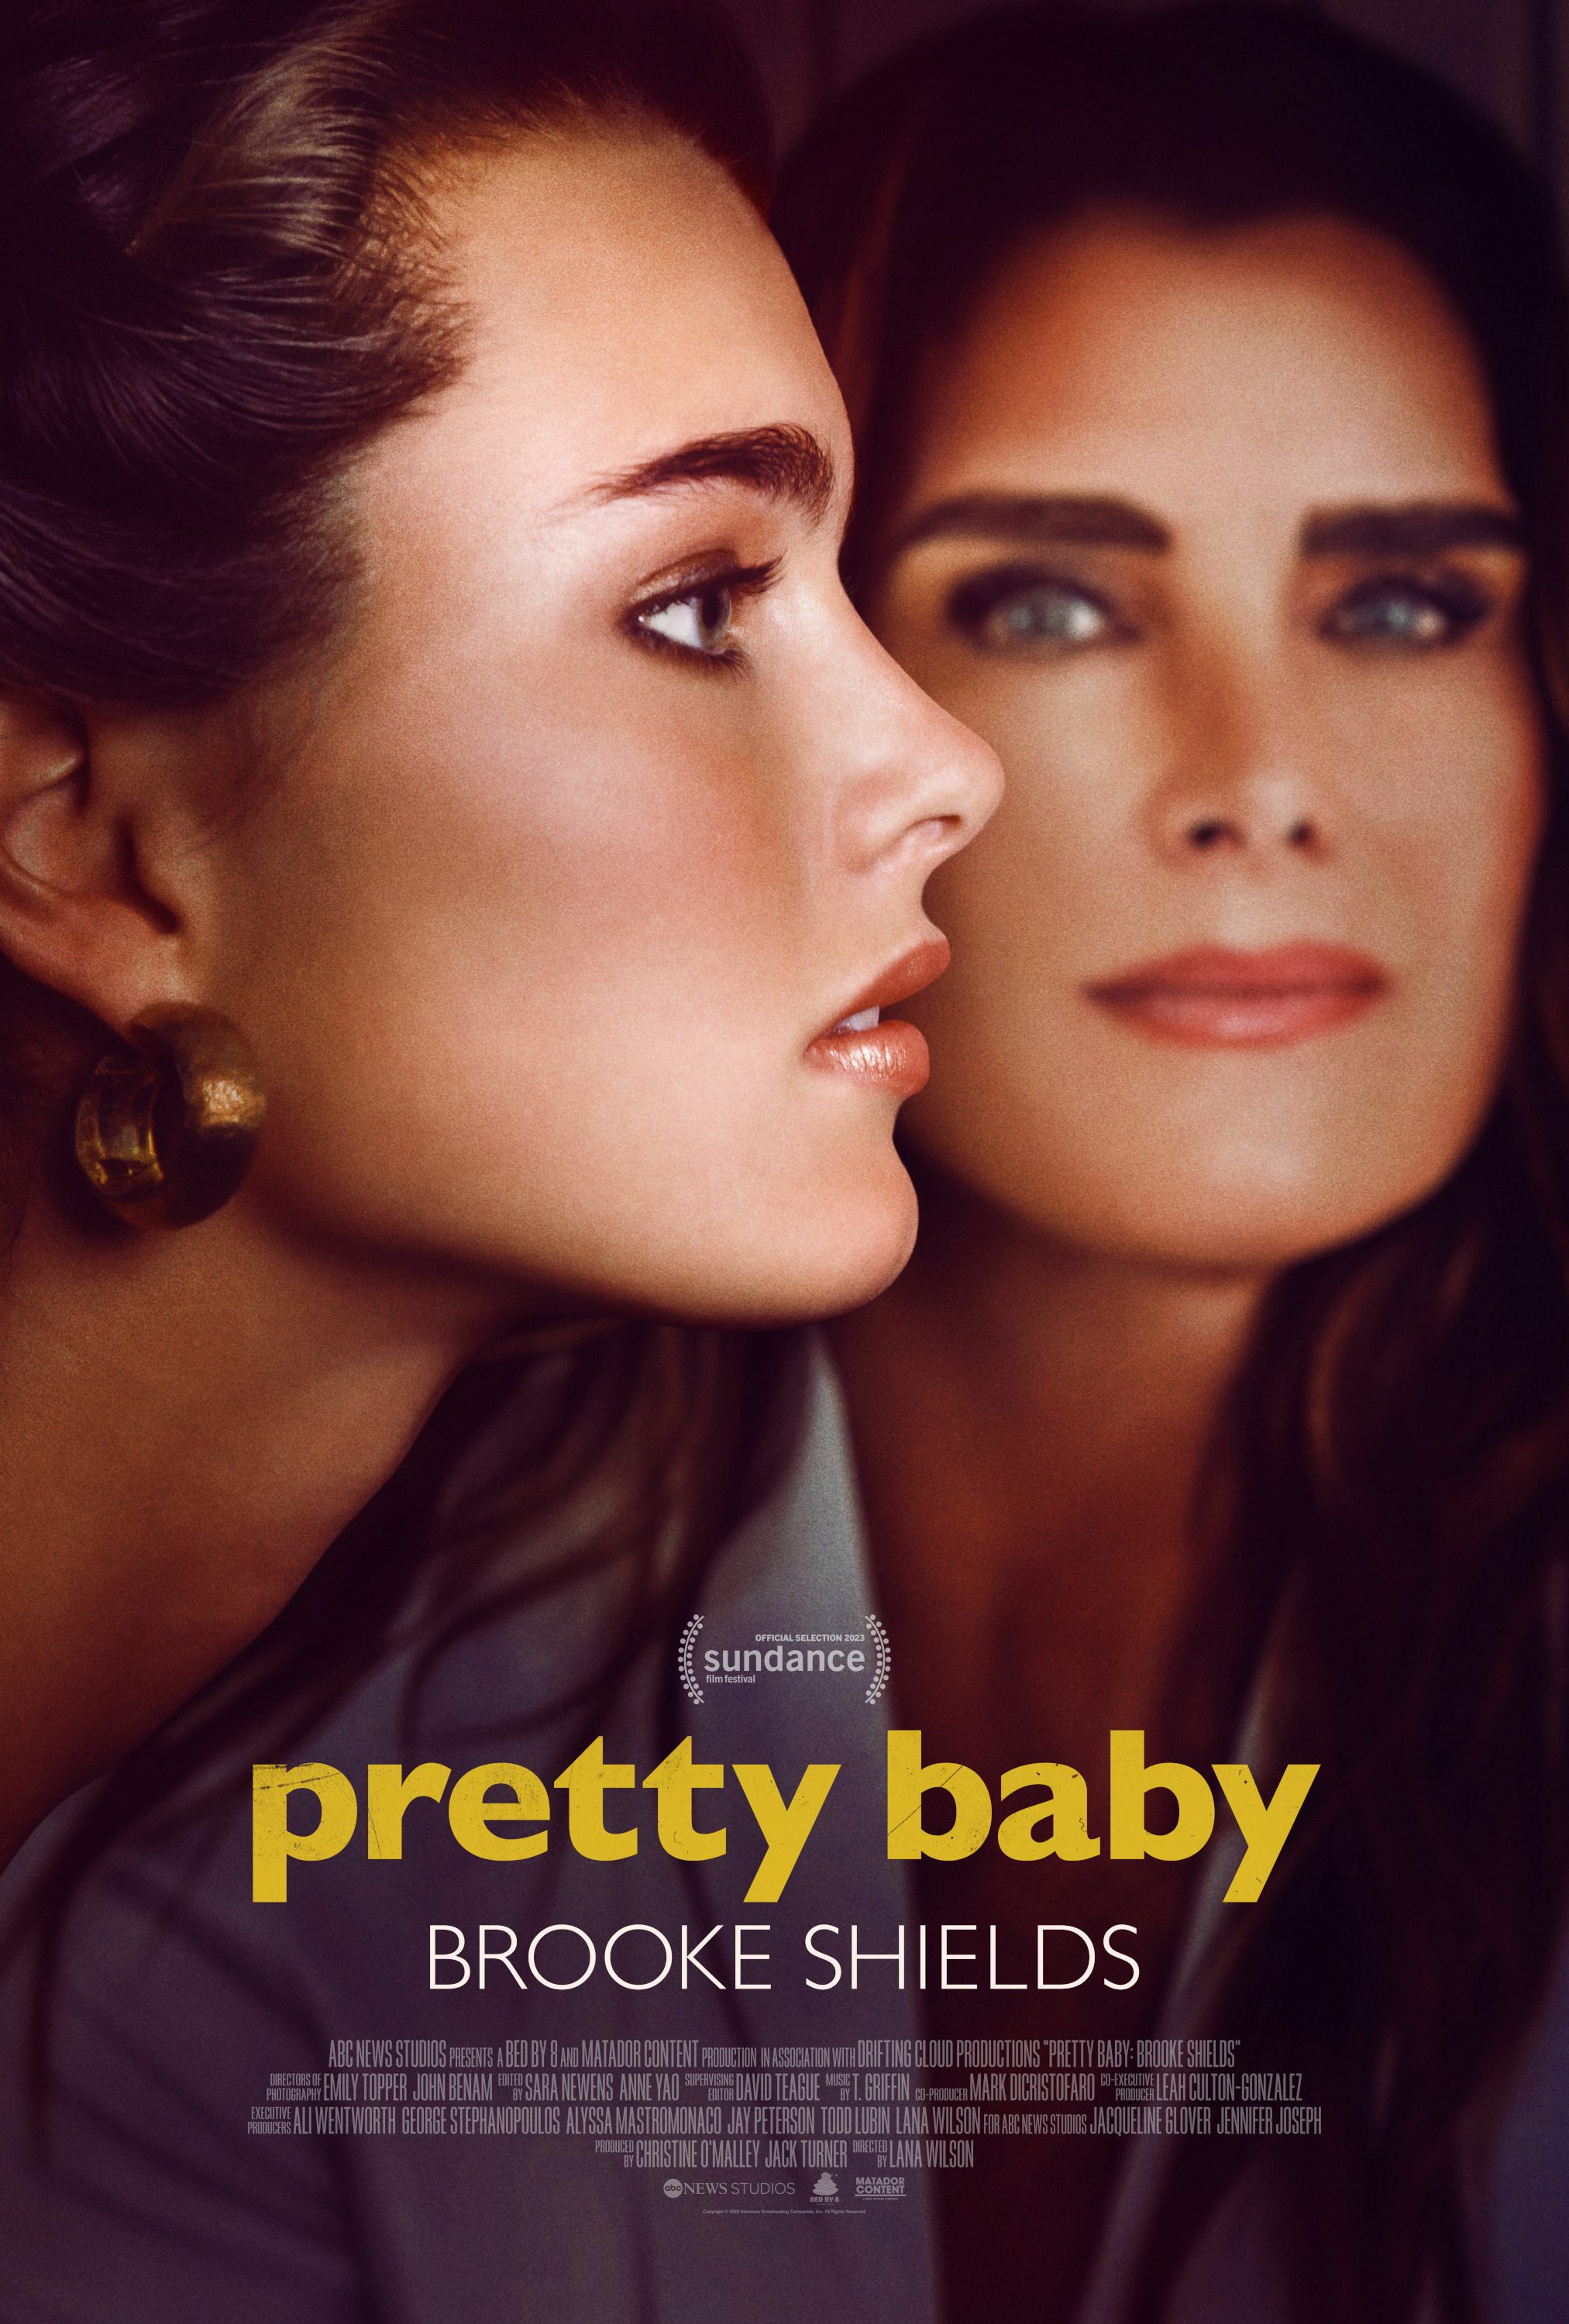 Brooke Shields Describes Experience With Sexual-Assault In 'Pretty Baby' 